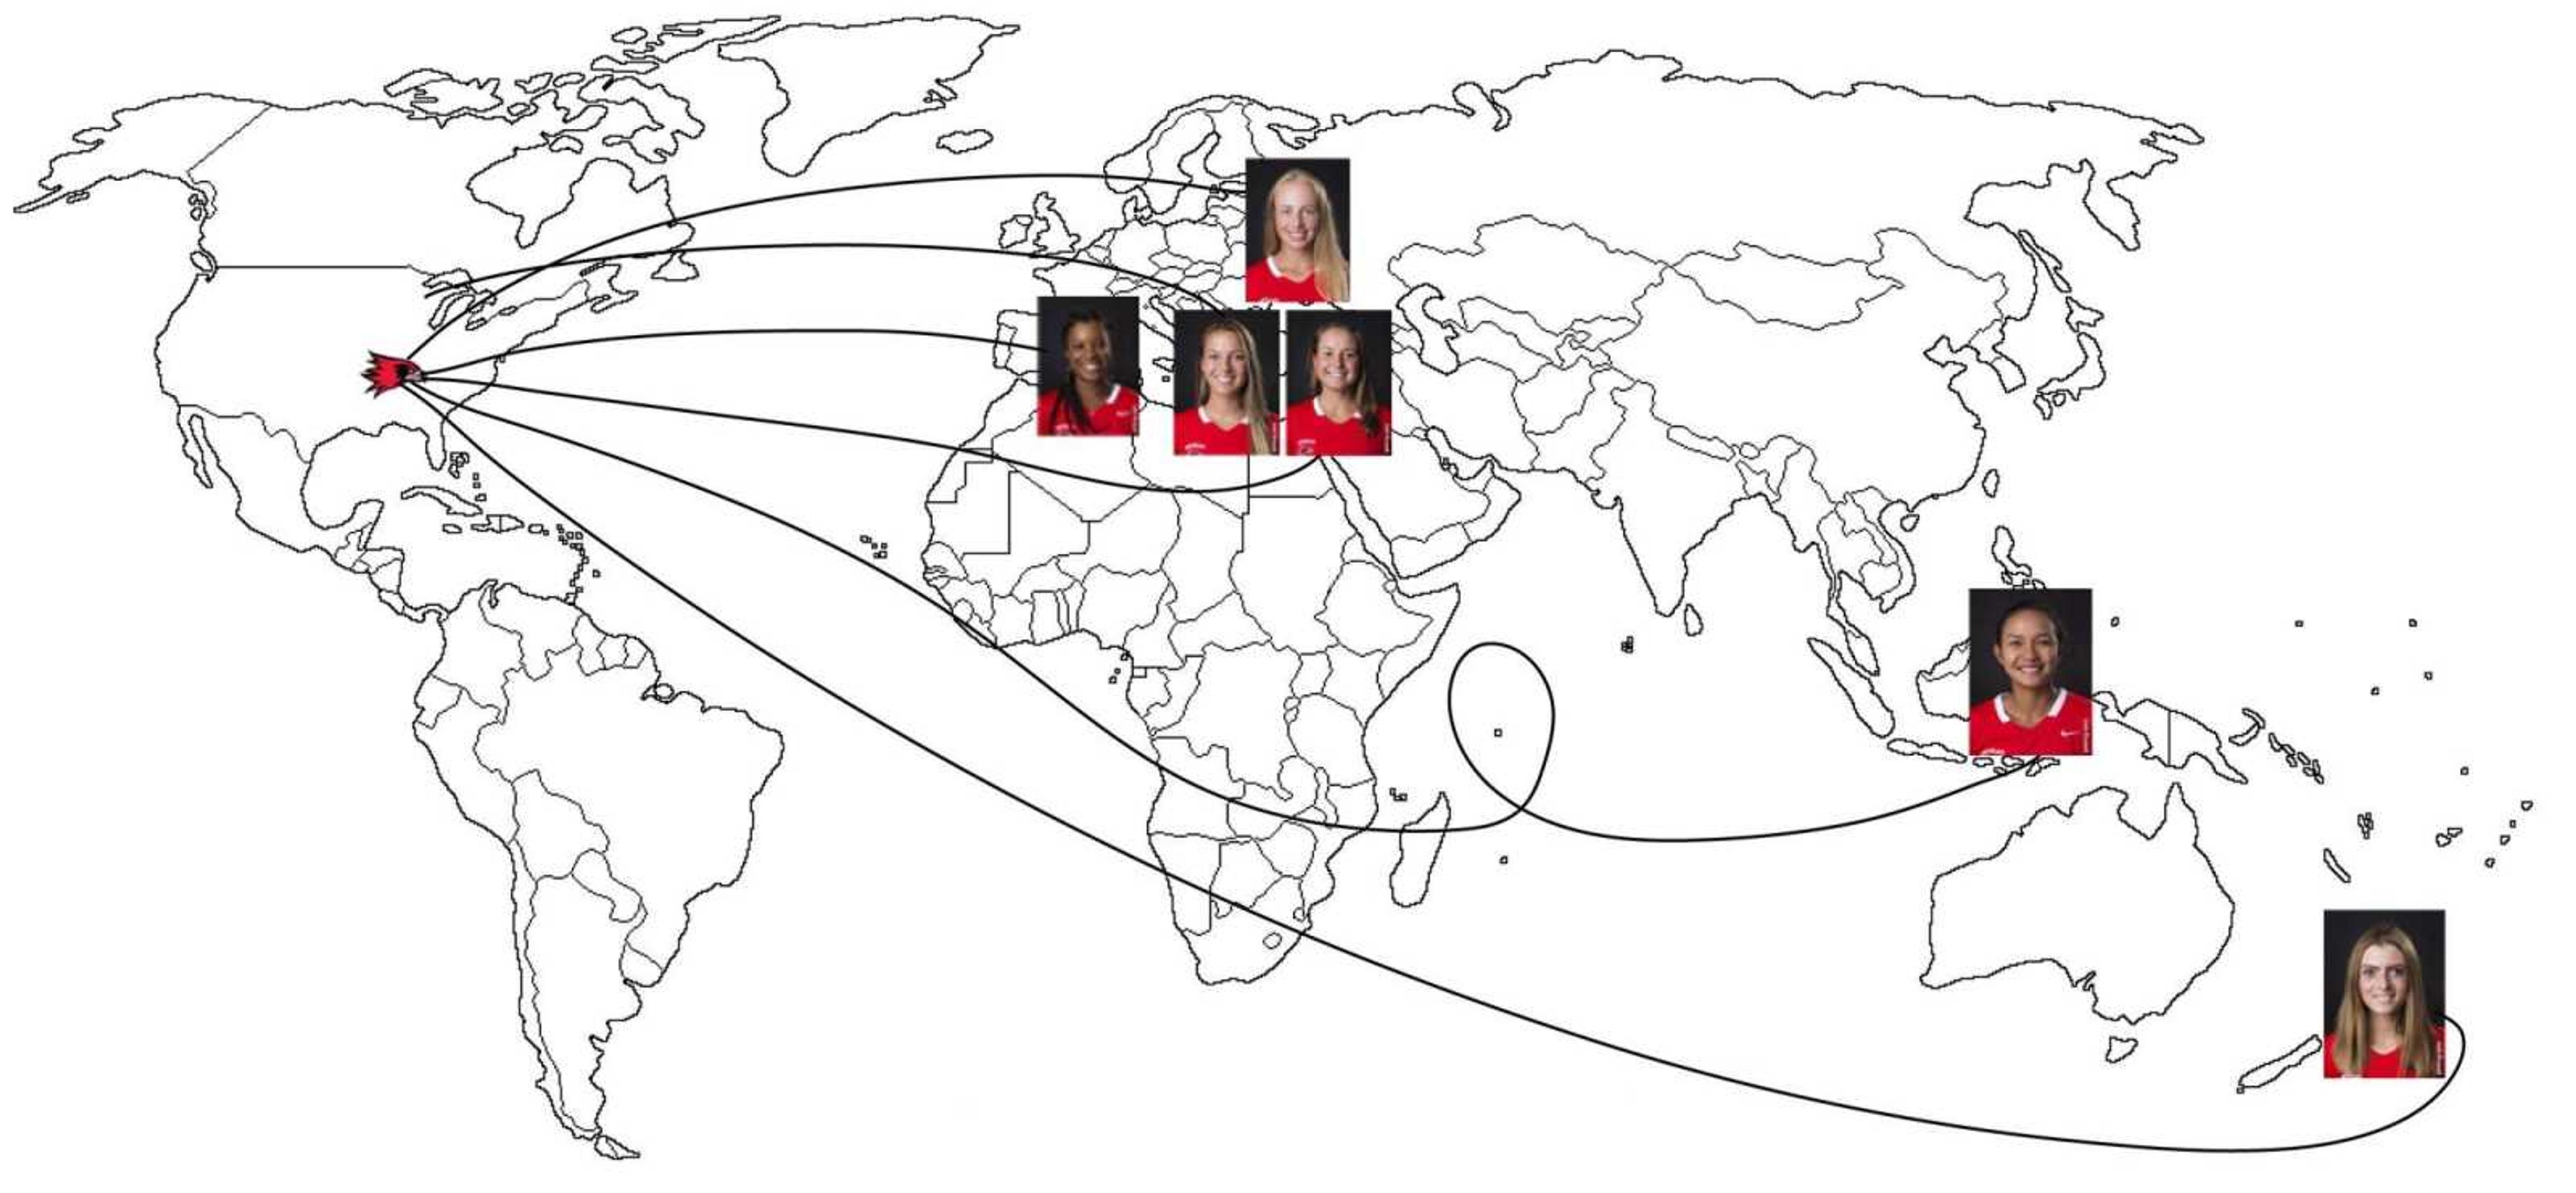 Members of Southeast's tennis team are from six different countries across the globe. Infographic by Riley Hayes